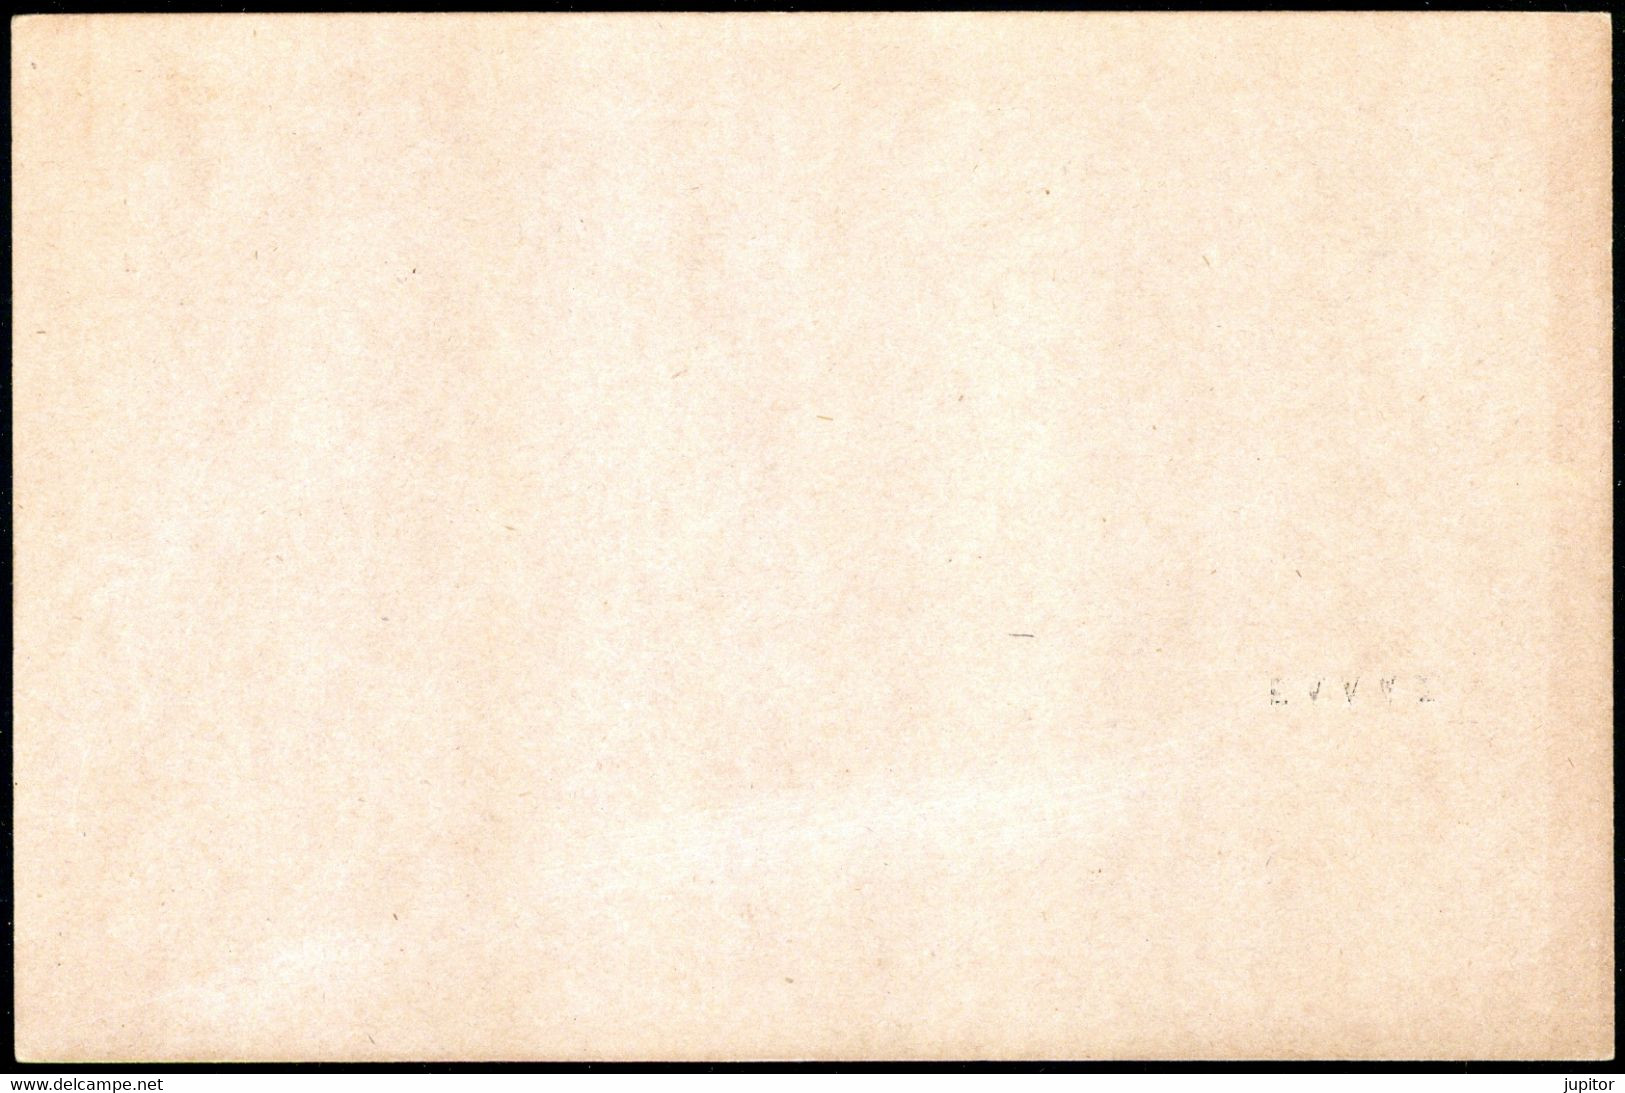 Greece Crete Hermes Prepaid Postal Card With ΕΛΛΑΣ Surcharge New Value 1912 CANCEL FDC? - Crete